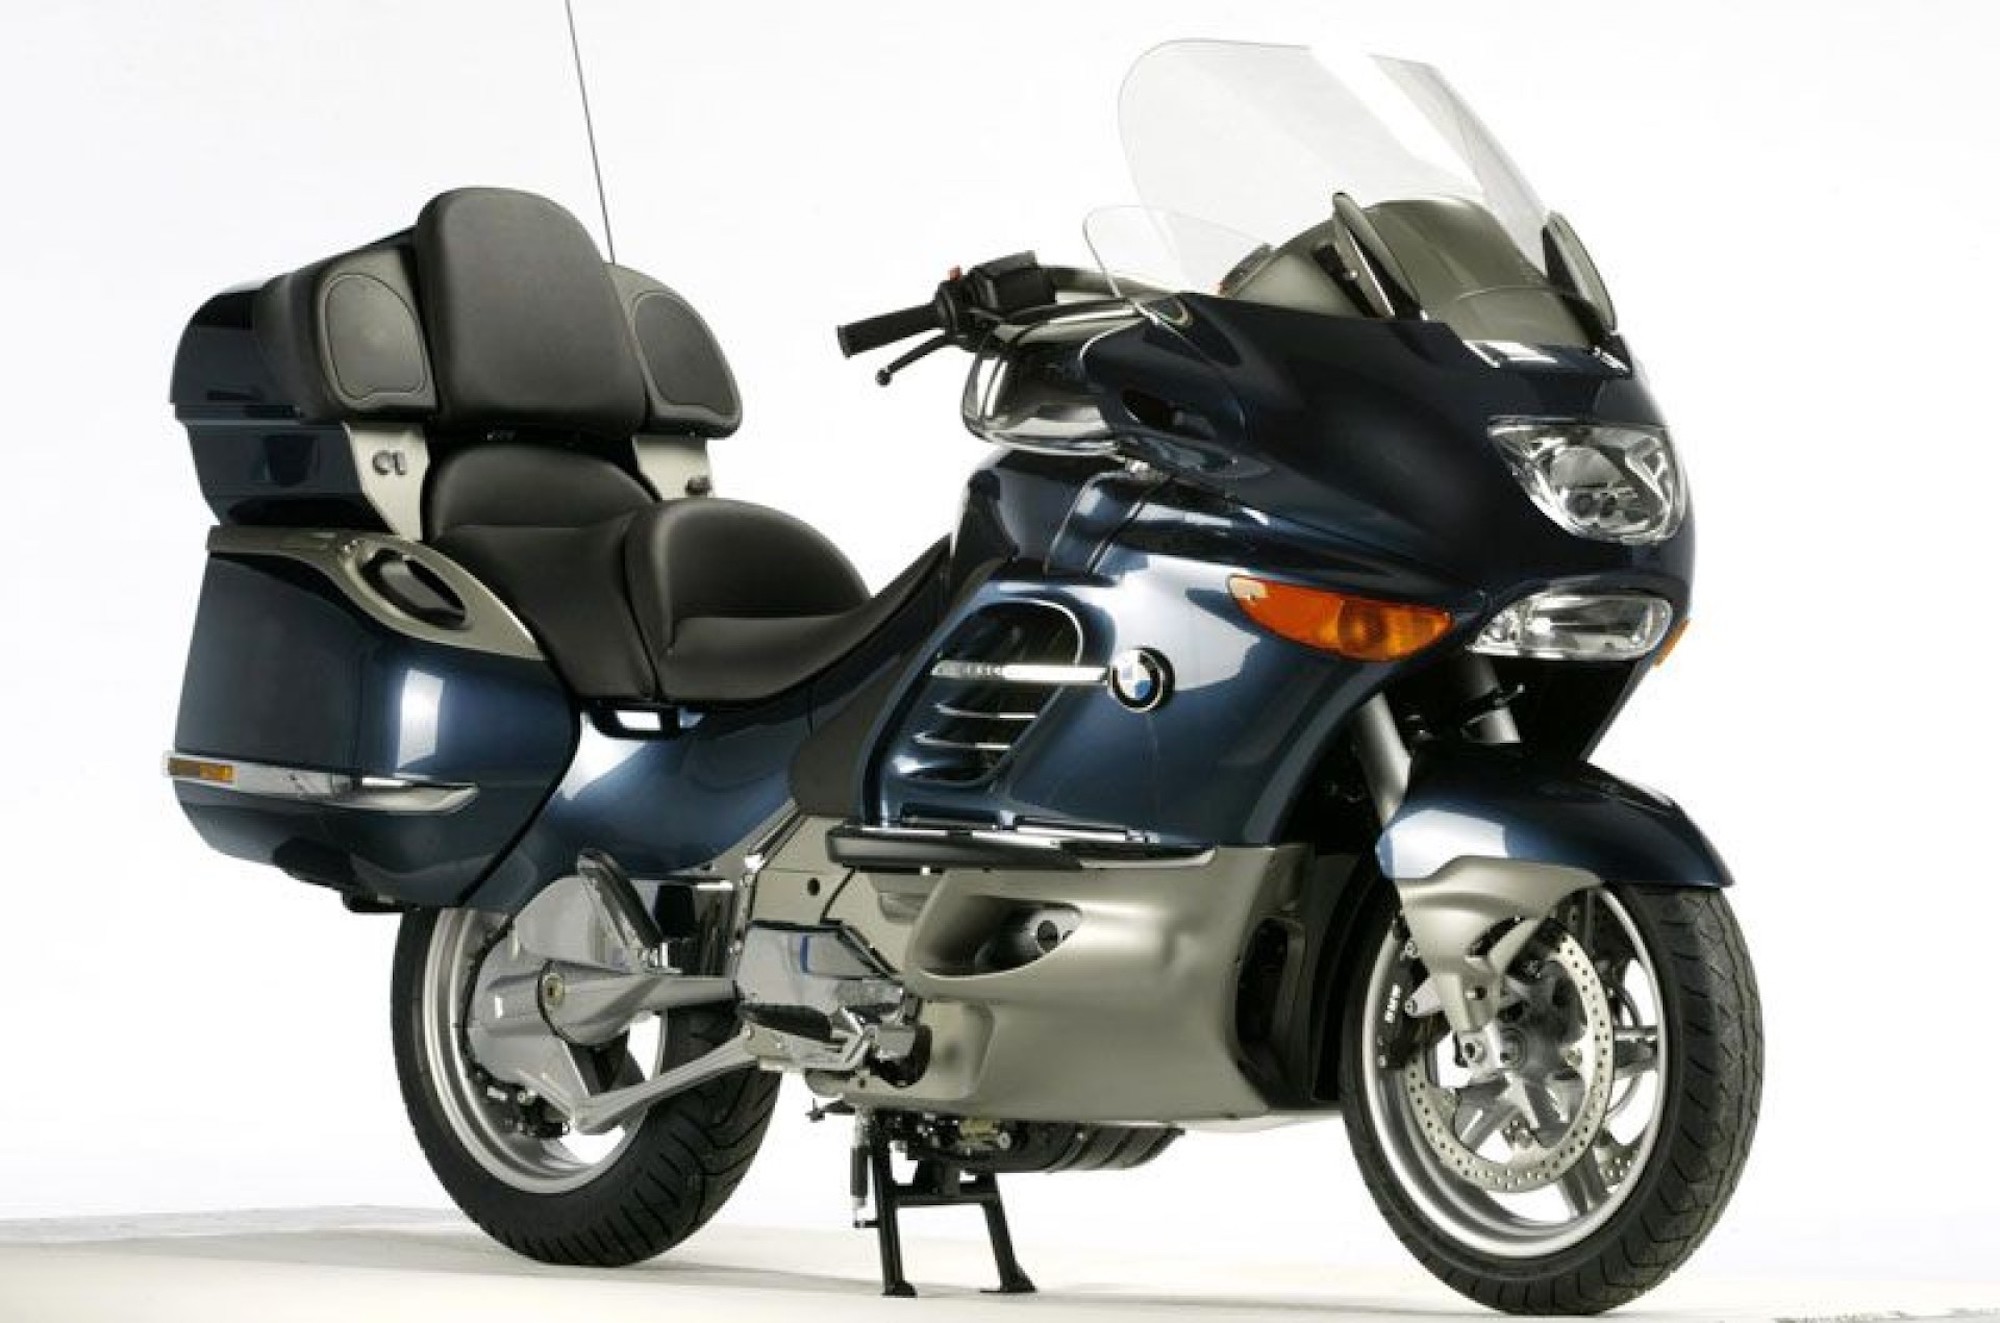 A view of BMW's 2004 K1200 LT, which featured a hydraulic/electronic stand. Media sourced from Motorcycle Sports.